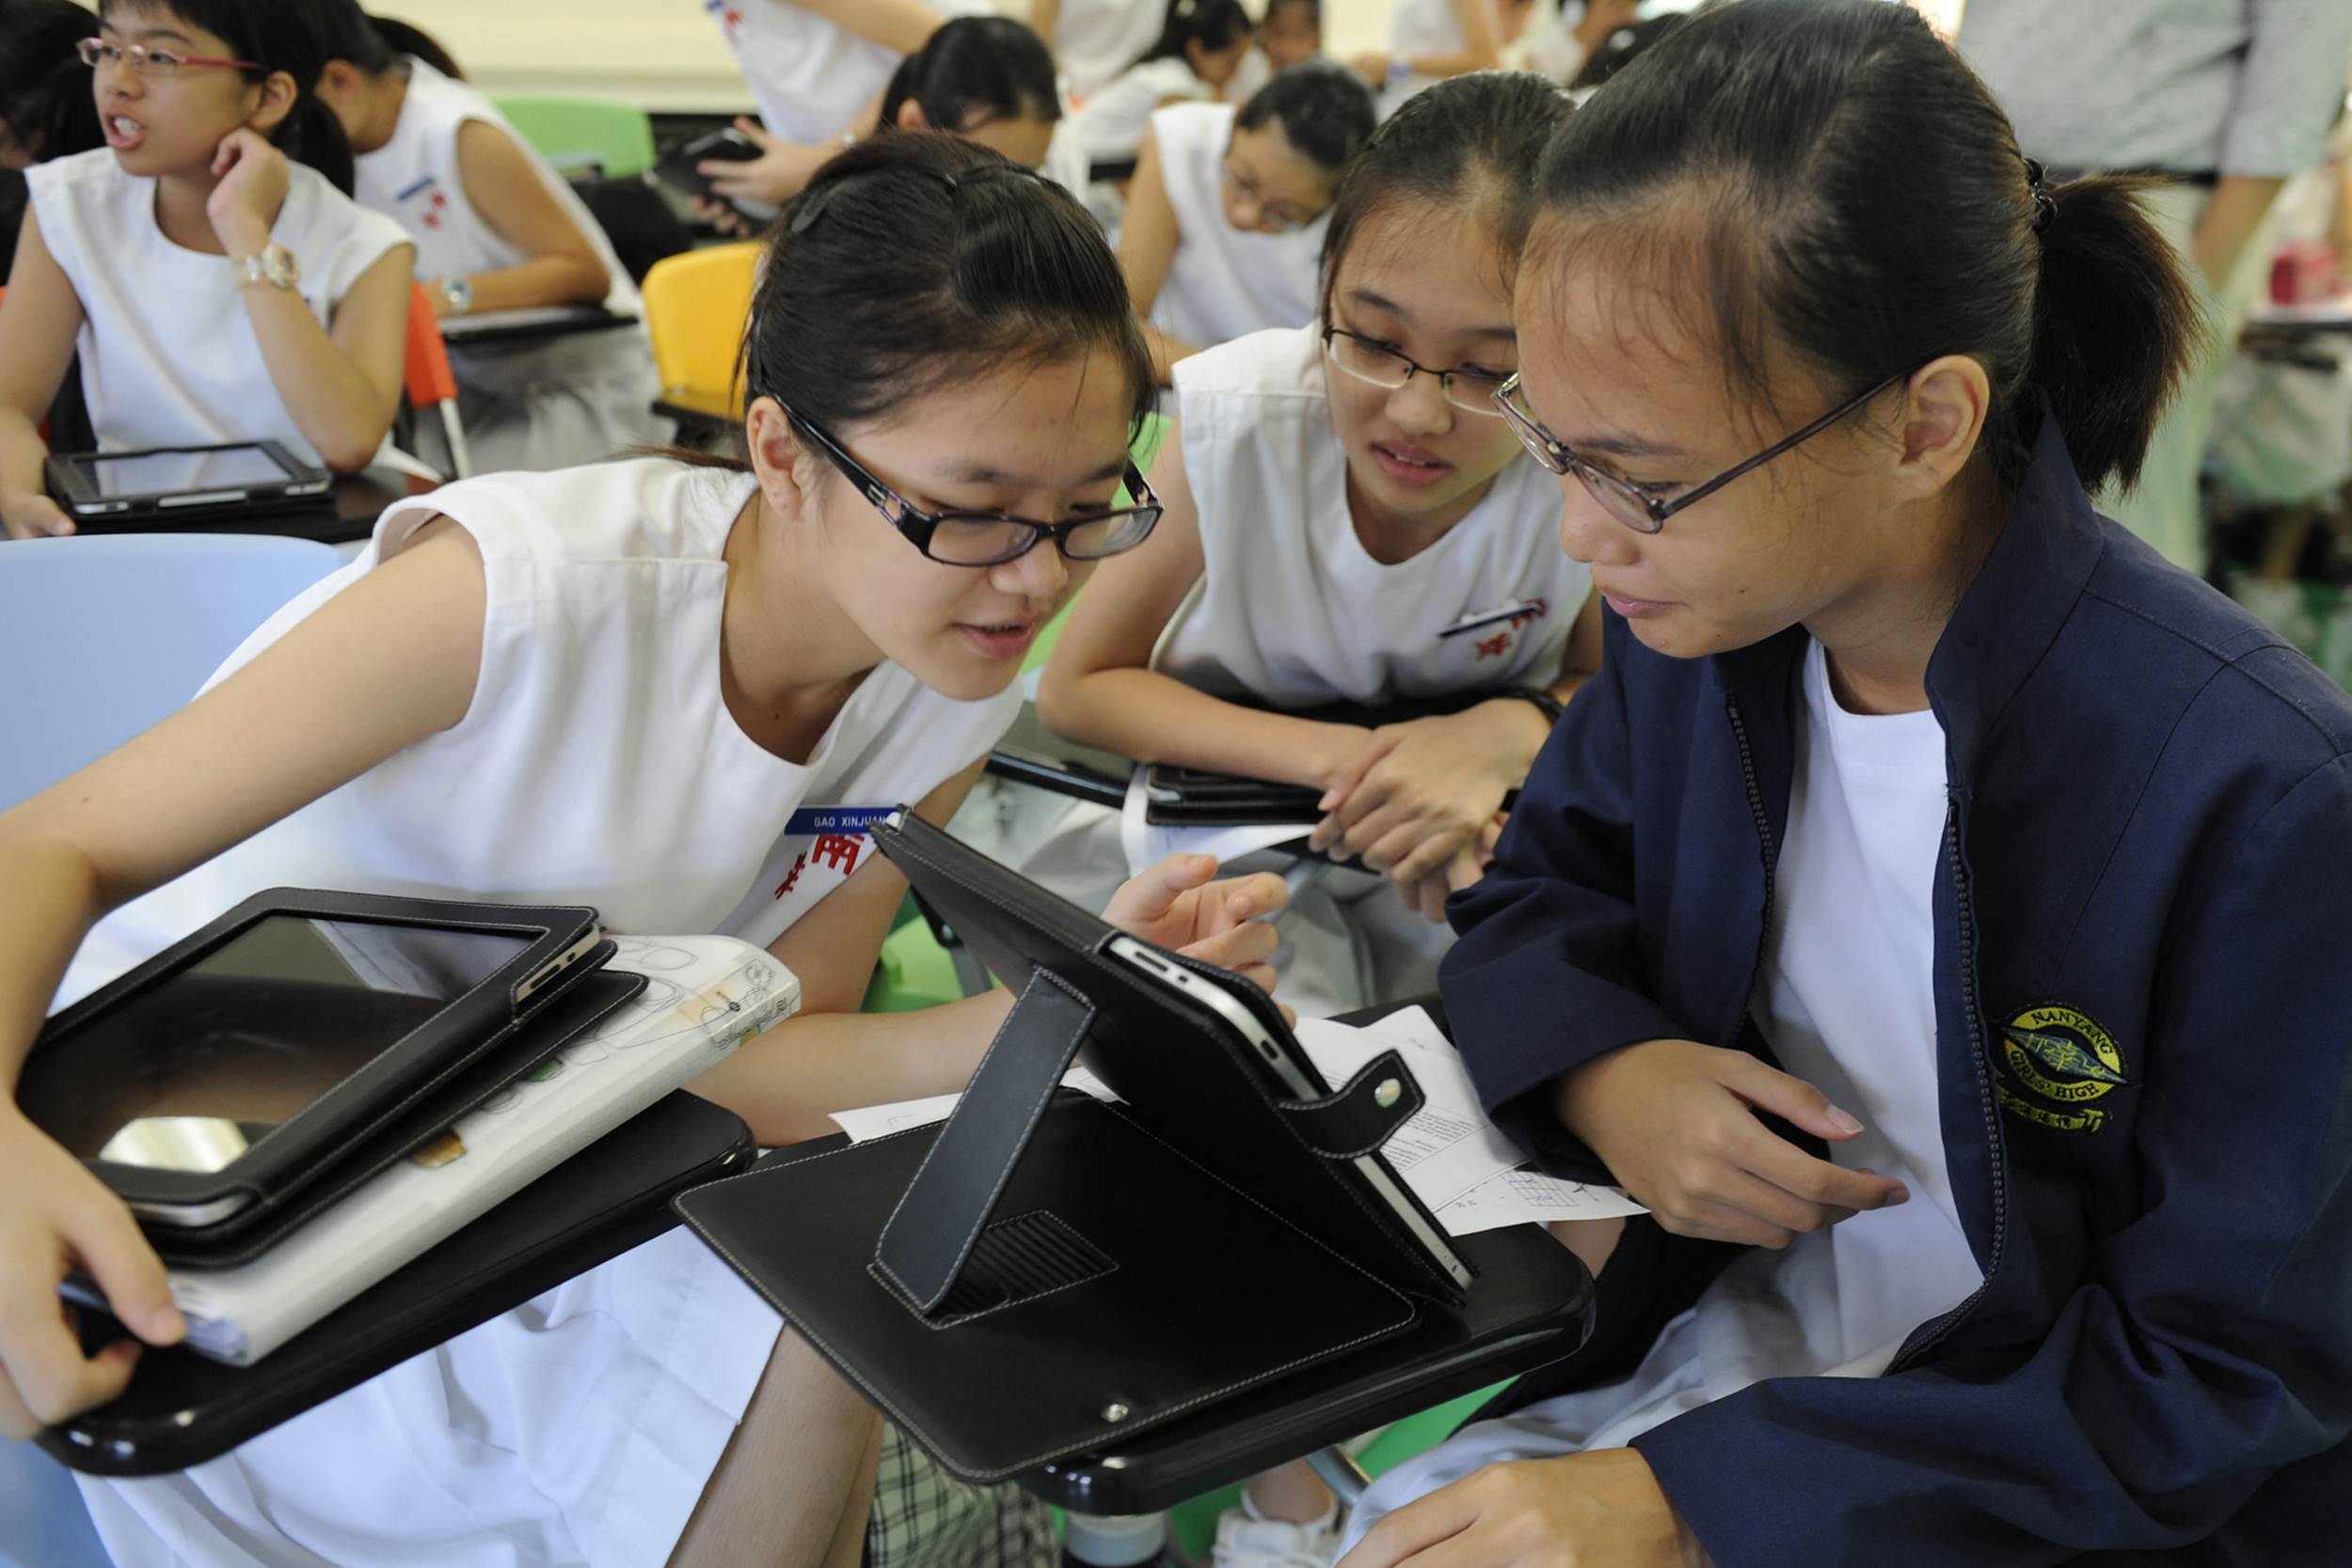 Singapore is globally recognized as a leader in EdTech adoption and the country’s readiness to embrace education technology can be traced as far back as 1997